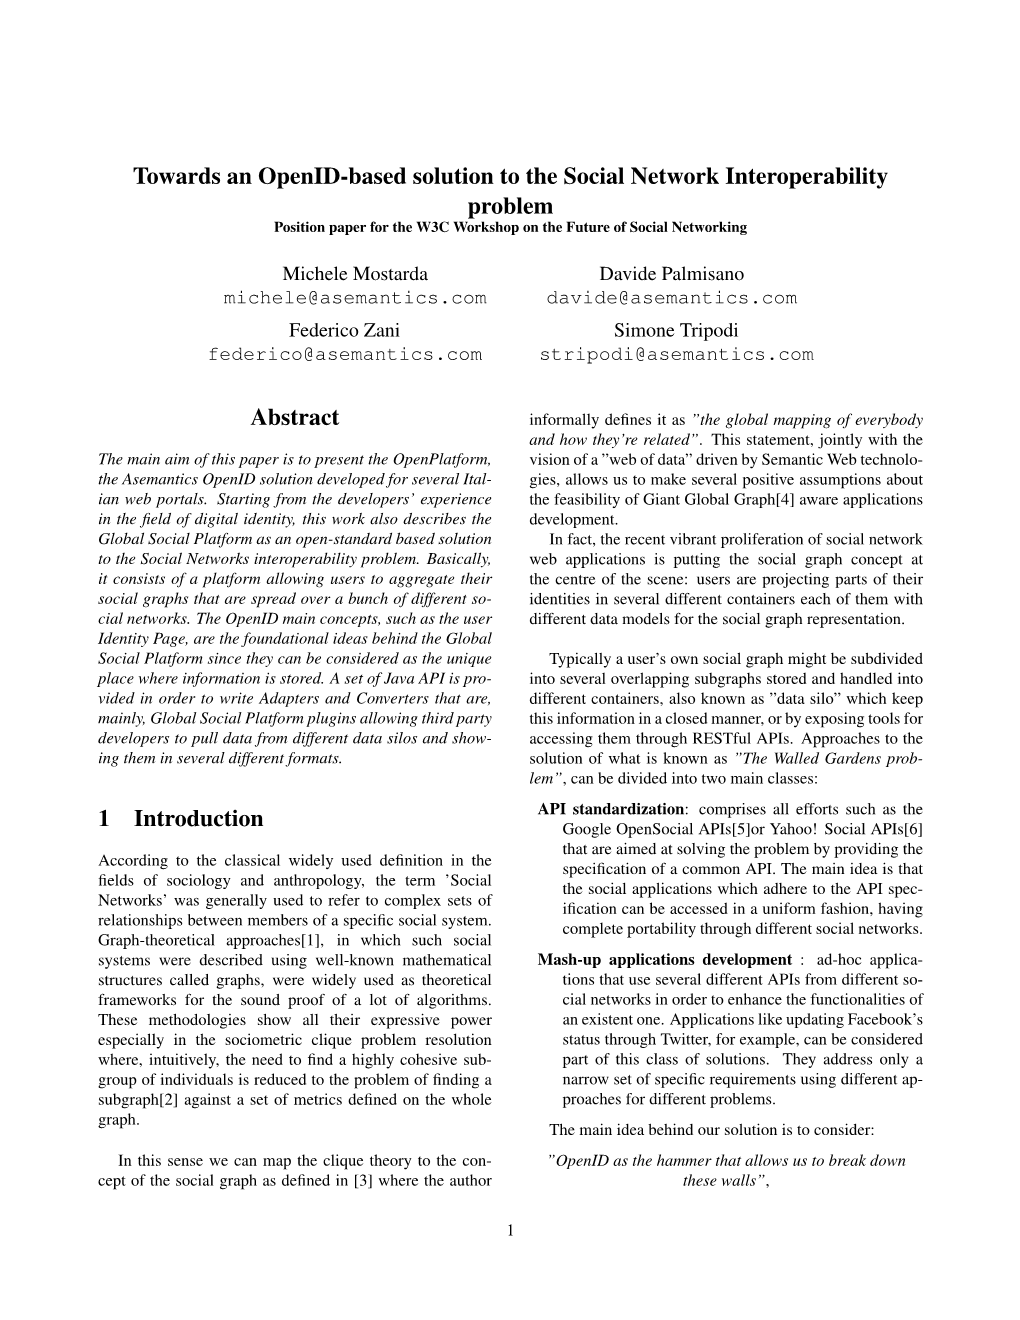 Towards an Openid-Based Solution to the Social Network Interoperability Problem Position Paper for the W3C Workshop on the Future of Social Networking